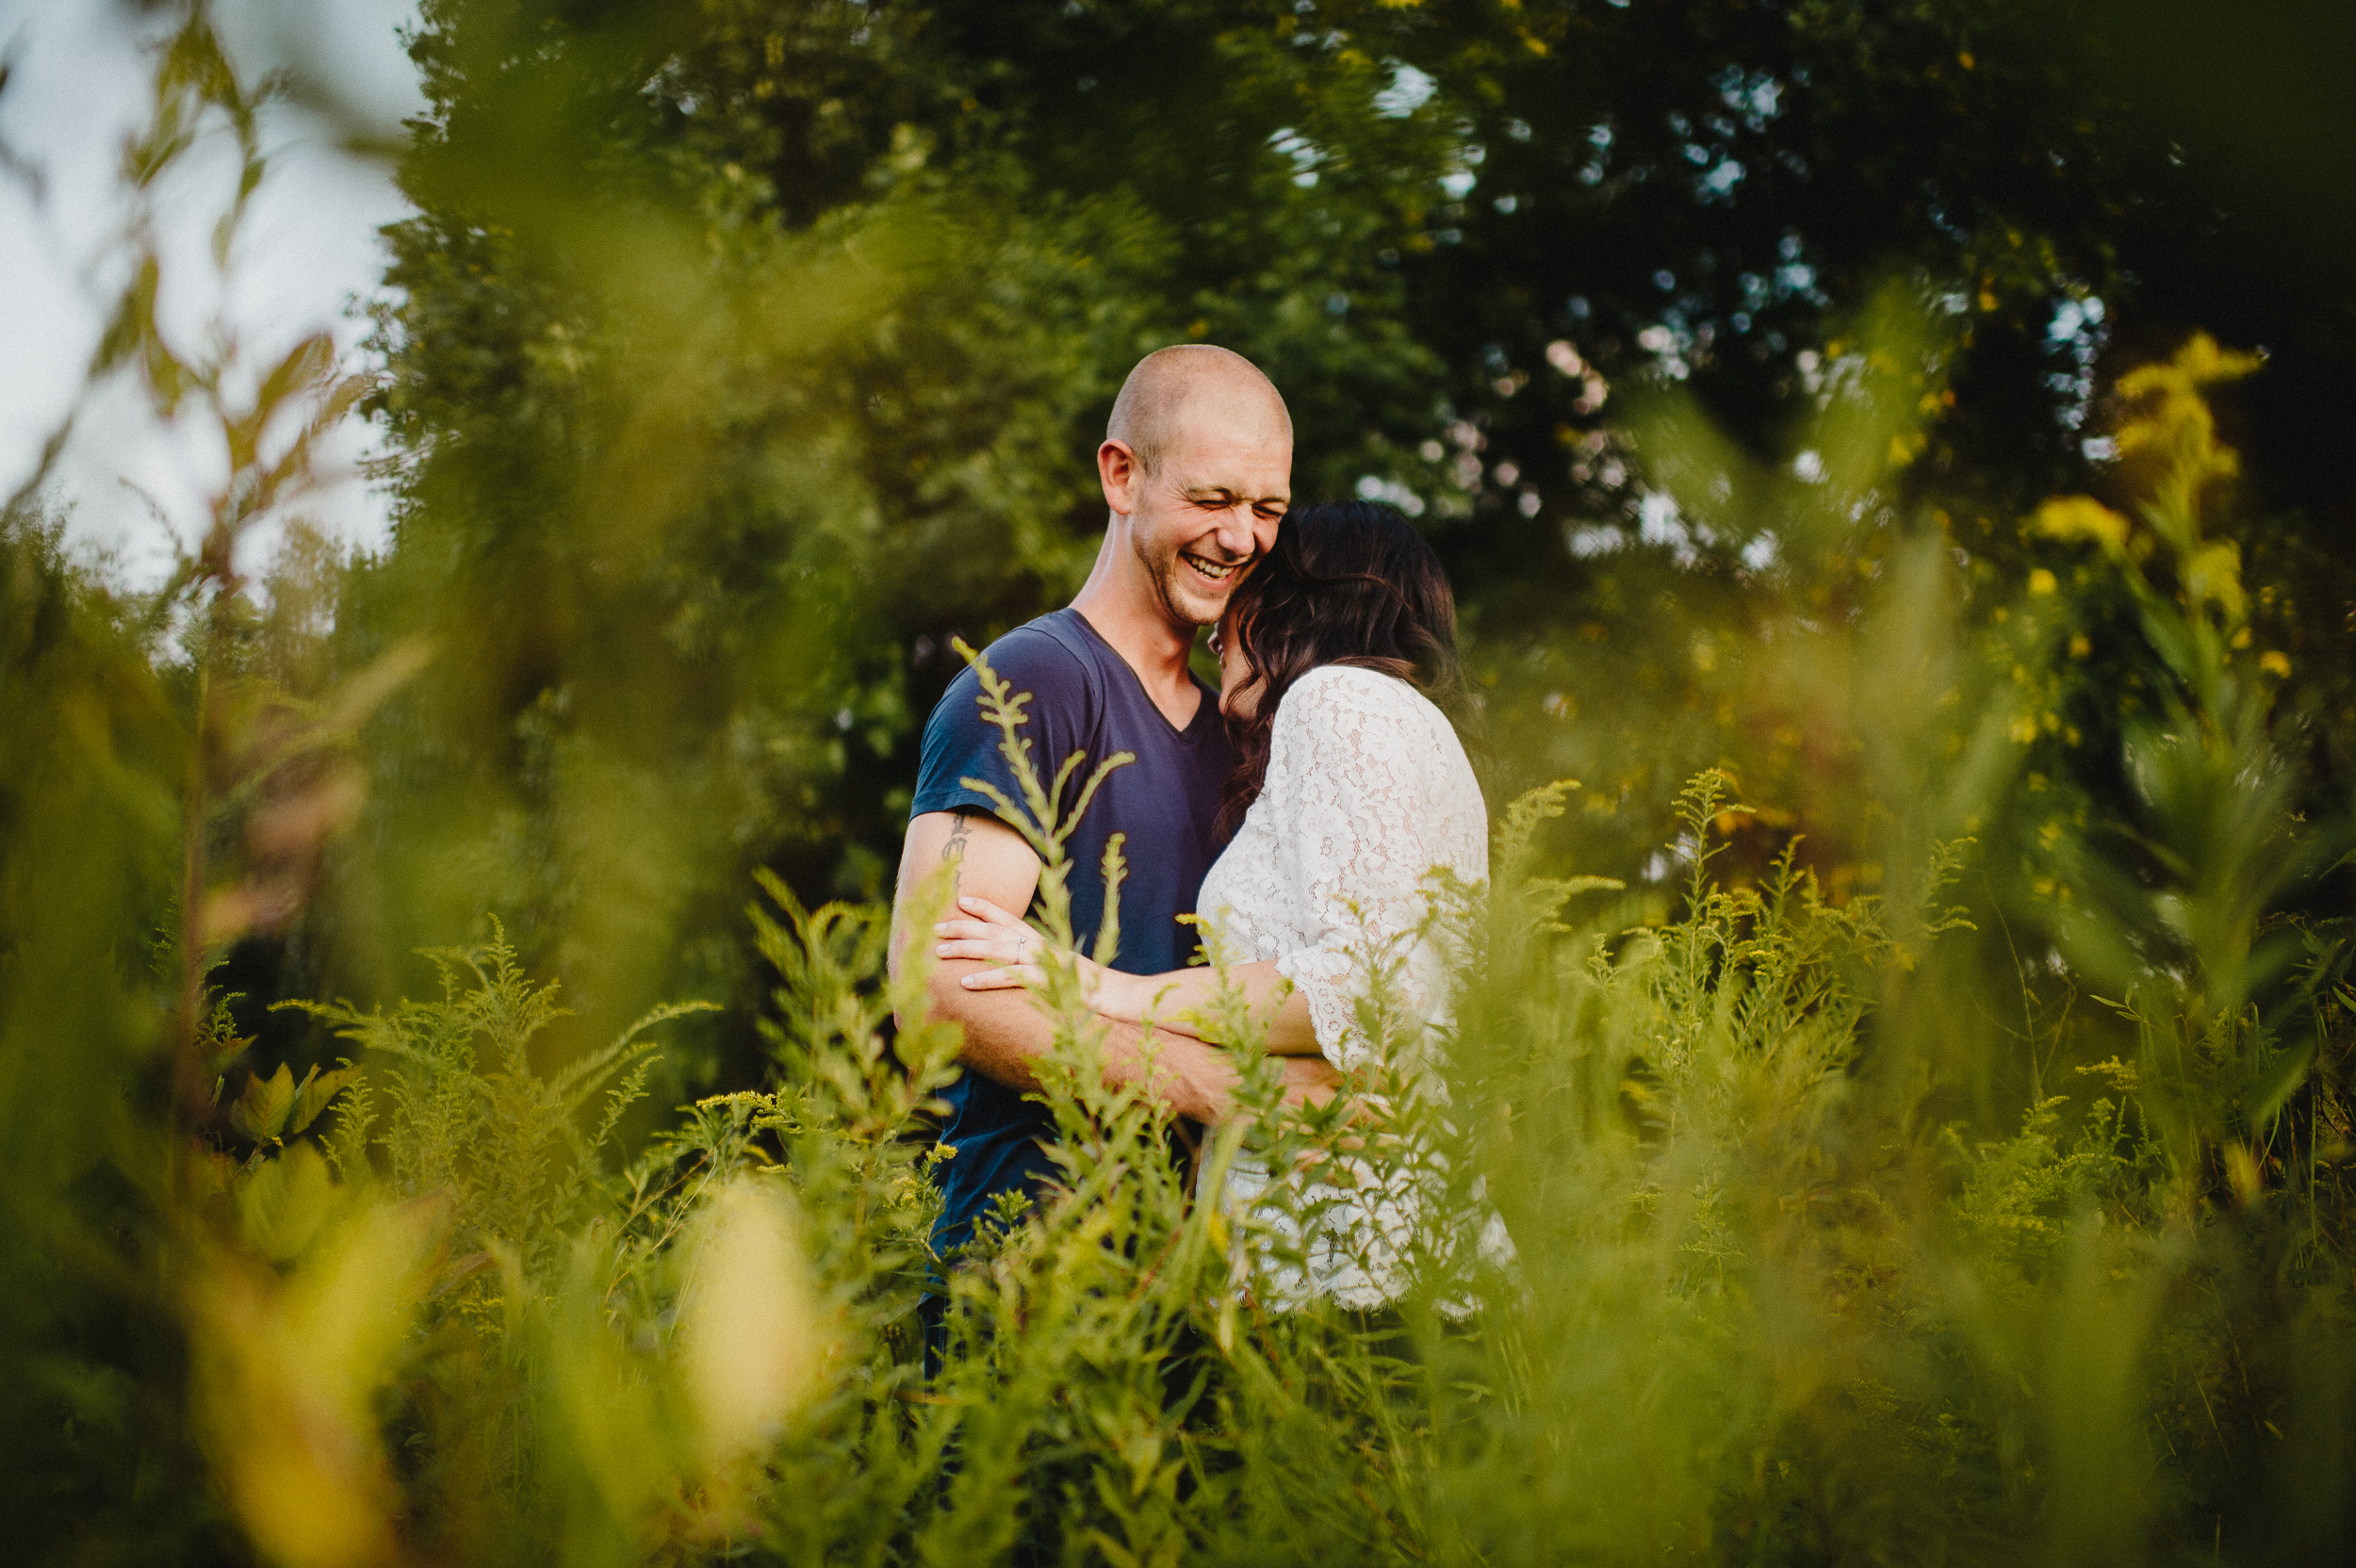 pat-robinson-photography-pa-engagement-session-16.jpg